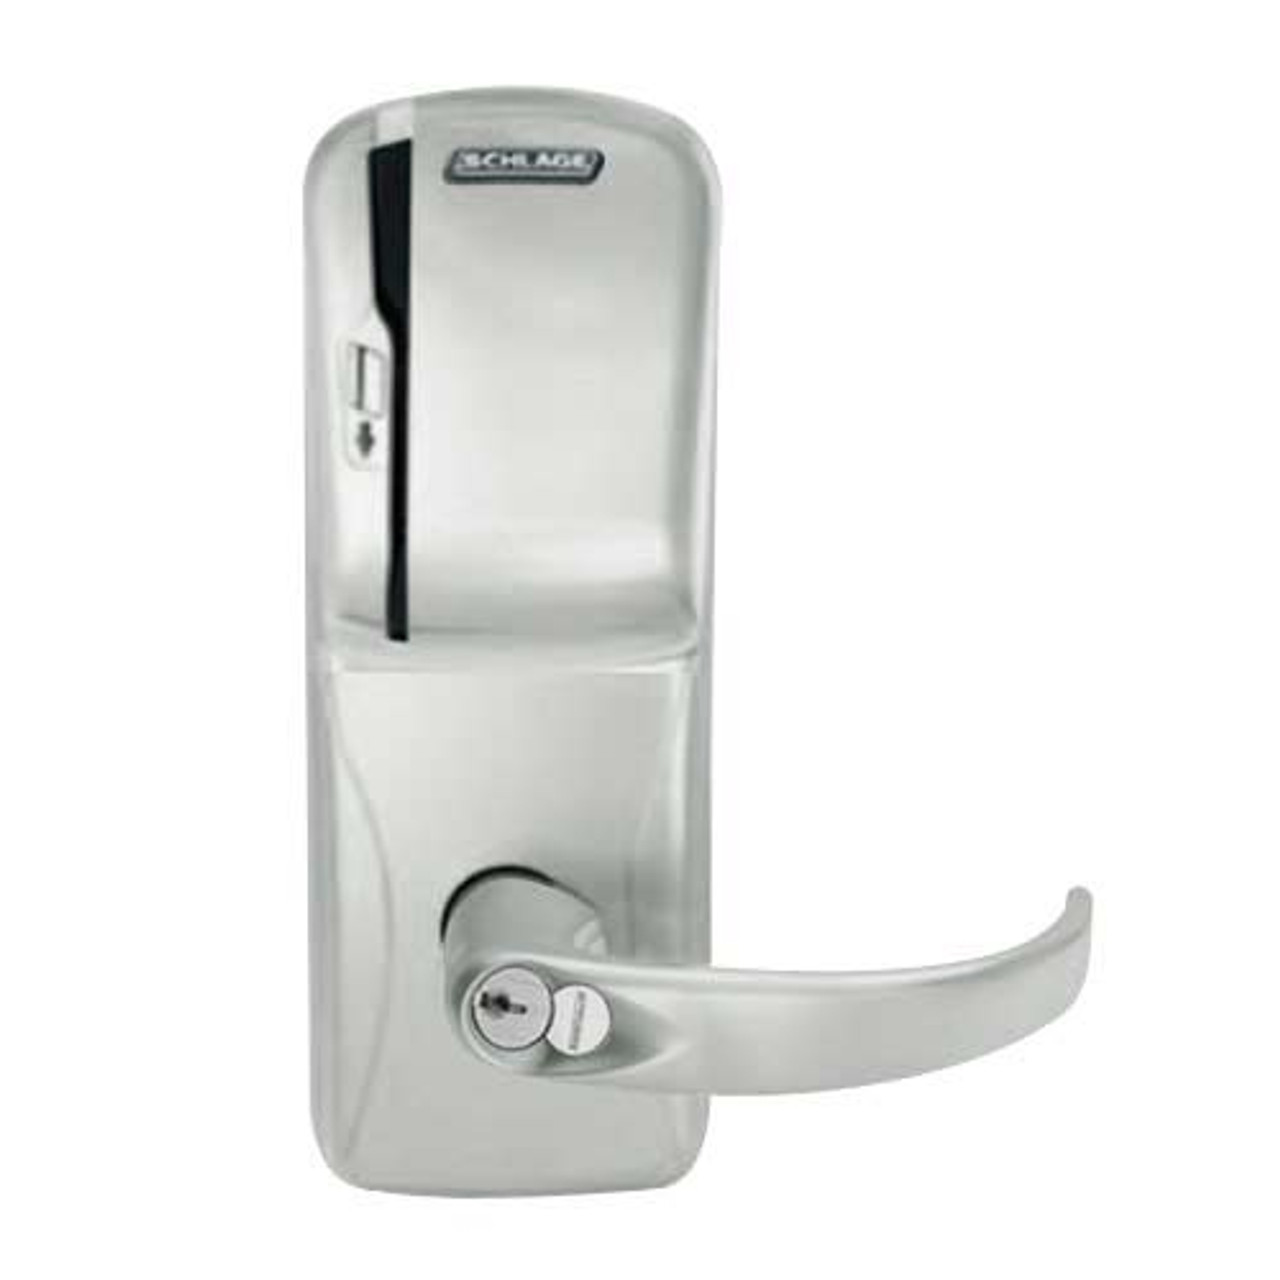 CO200-CY-70-MS-SPA-RD-619 Schlage Standalone Cylindrical Electronic Magnetic Stripe Reader Locks in Satin Nickel